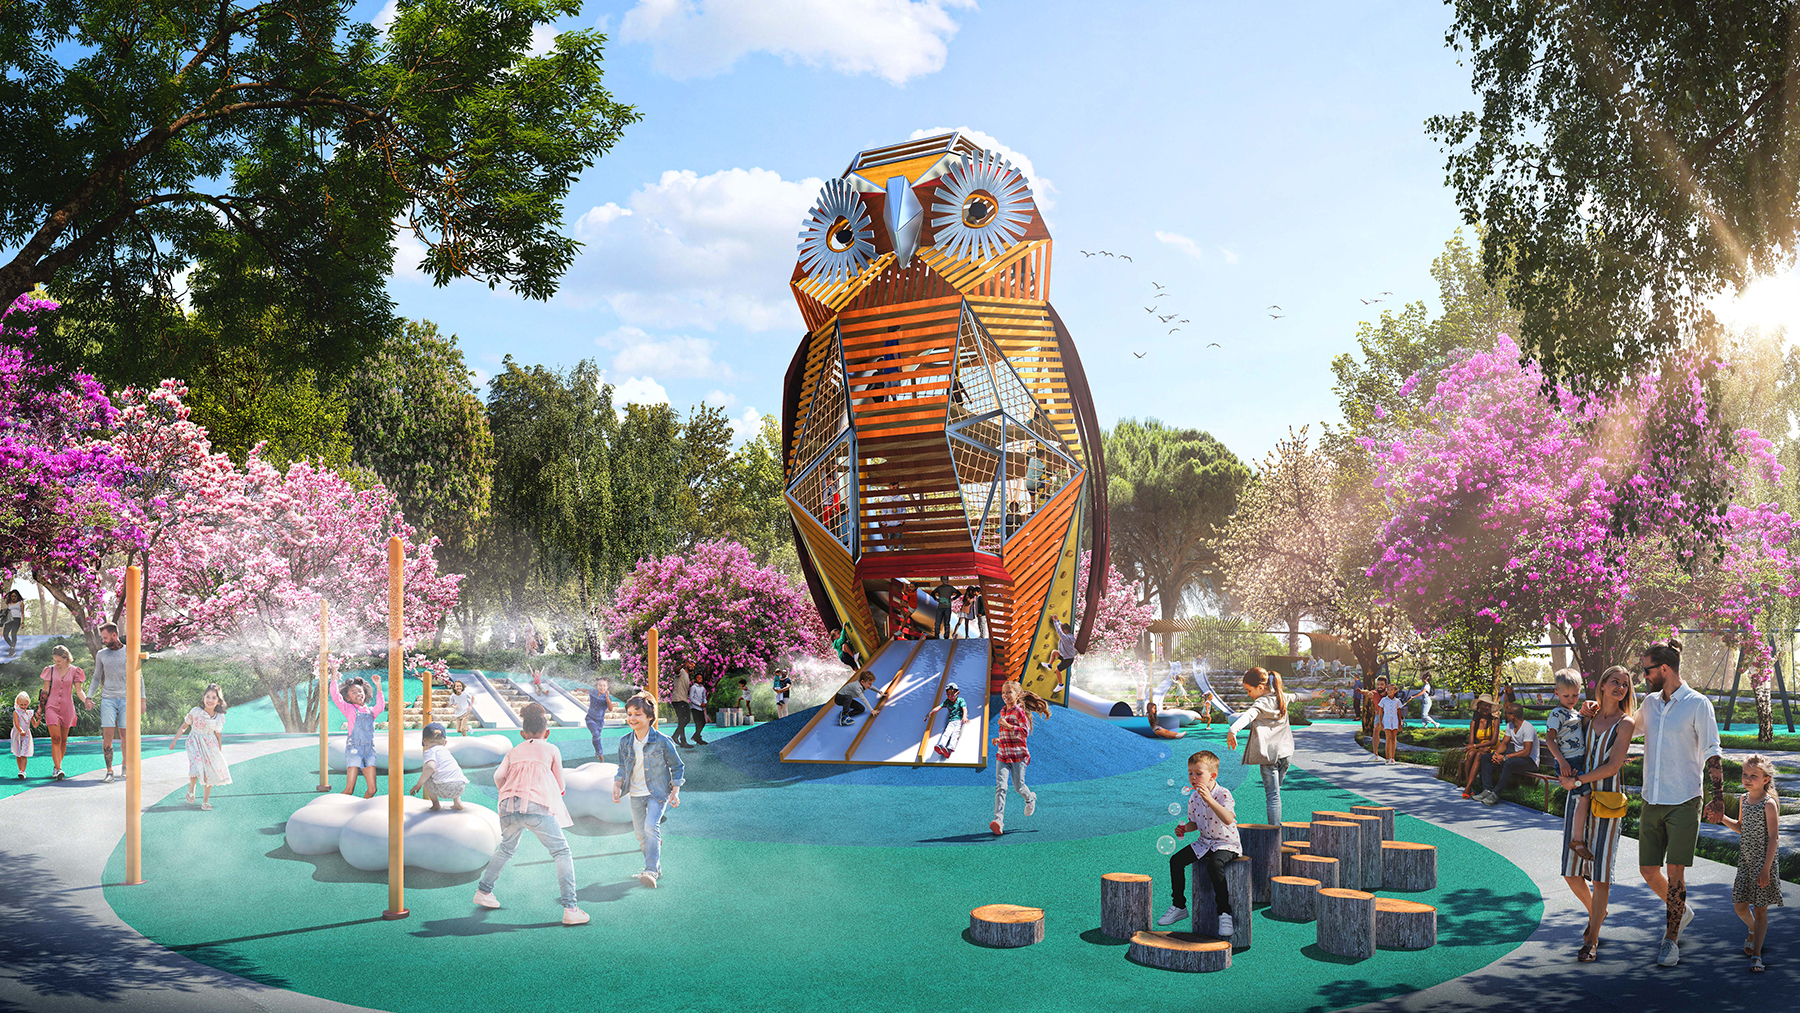 The themed play areas include the Athena Playground. Like other elements of the park — including plant species like Hyacinth, Daphne, and Narcissus — the area pays homage to Greek mythology. (Rendering courtesy of Sasaki)